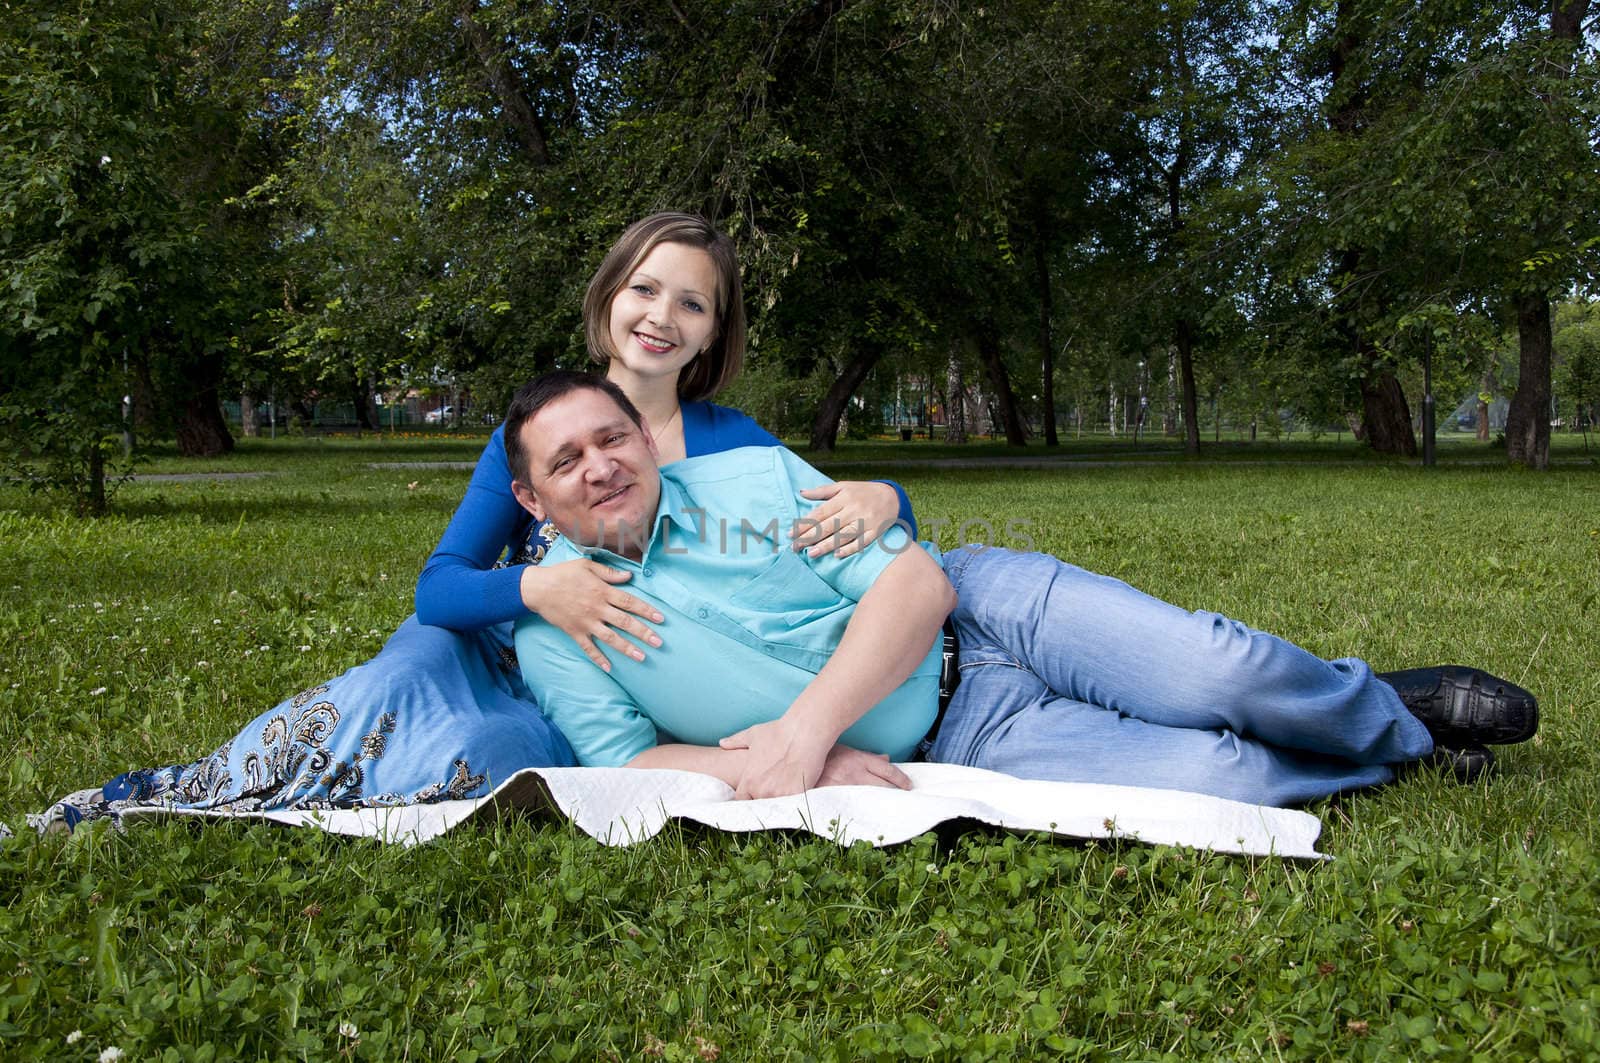 man and the woman lay together on a coverlet